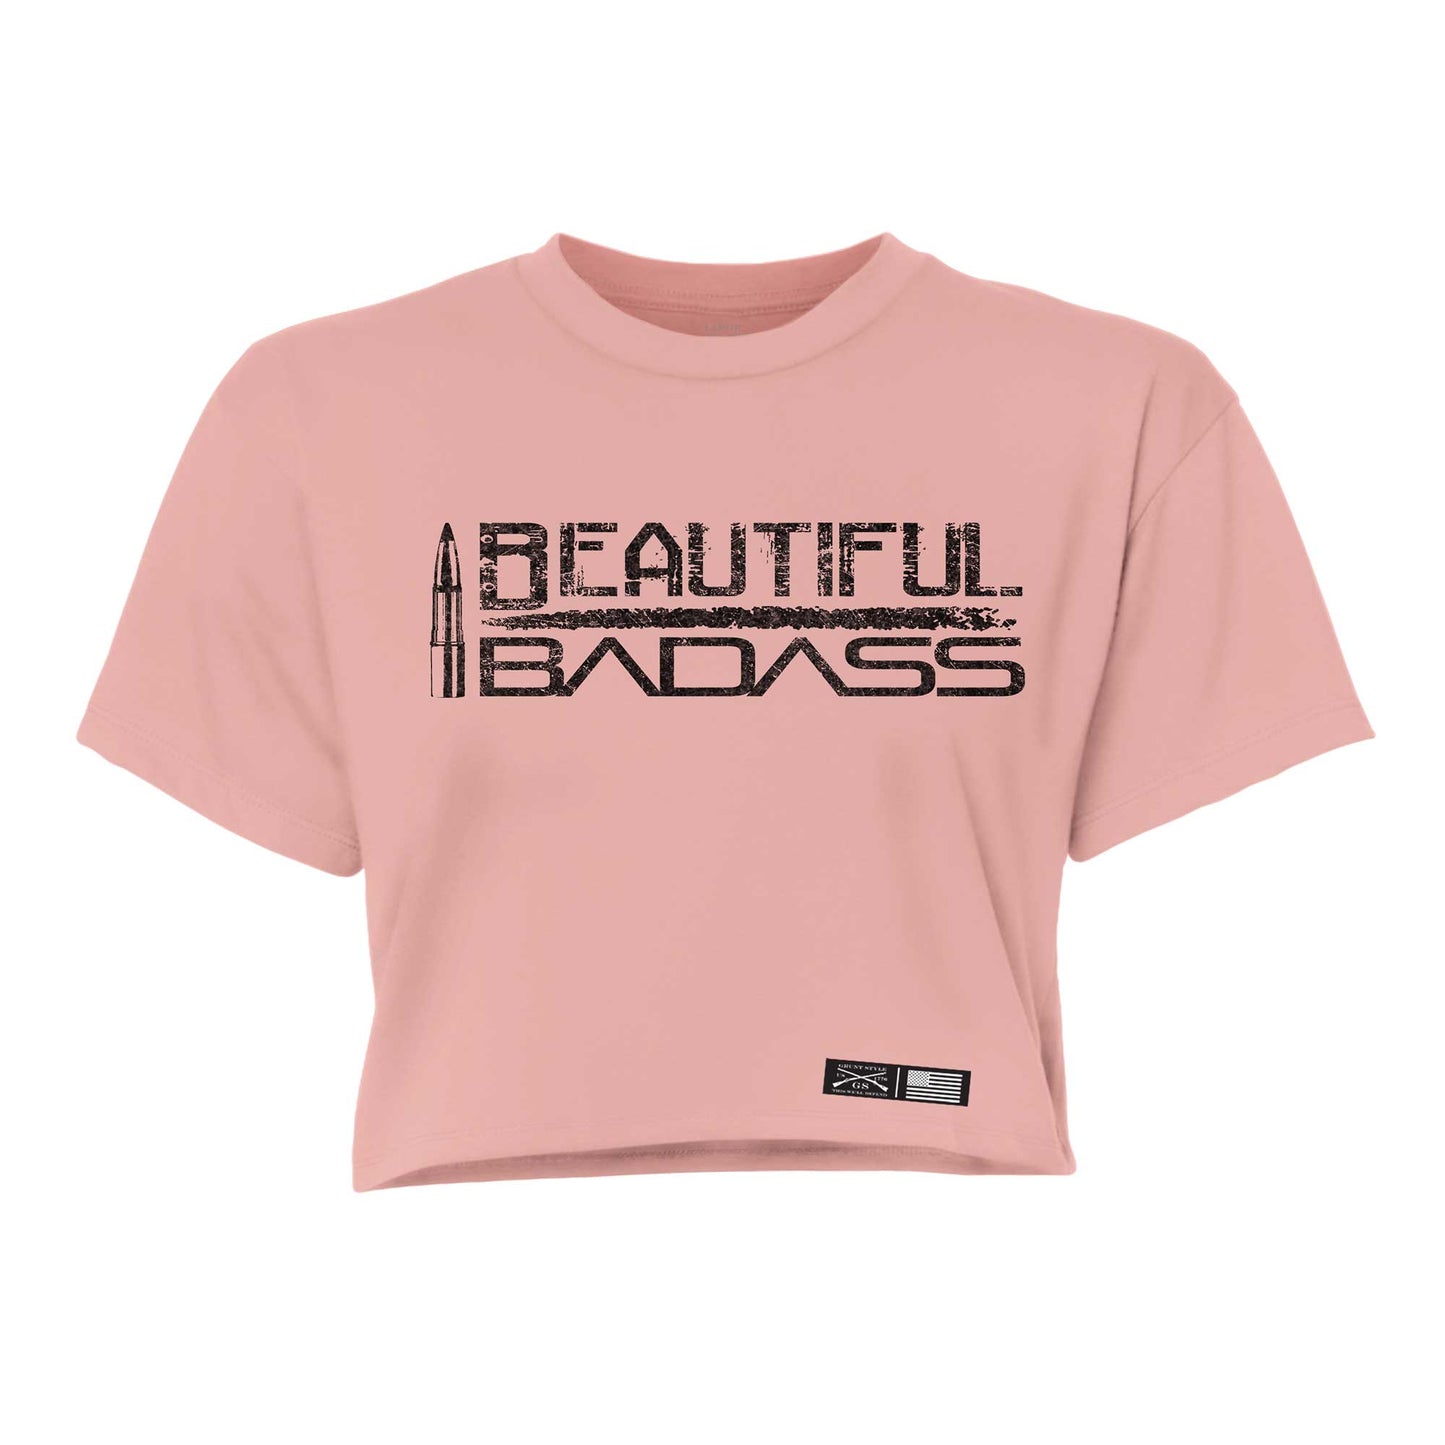 Cropped Tee for Women 